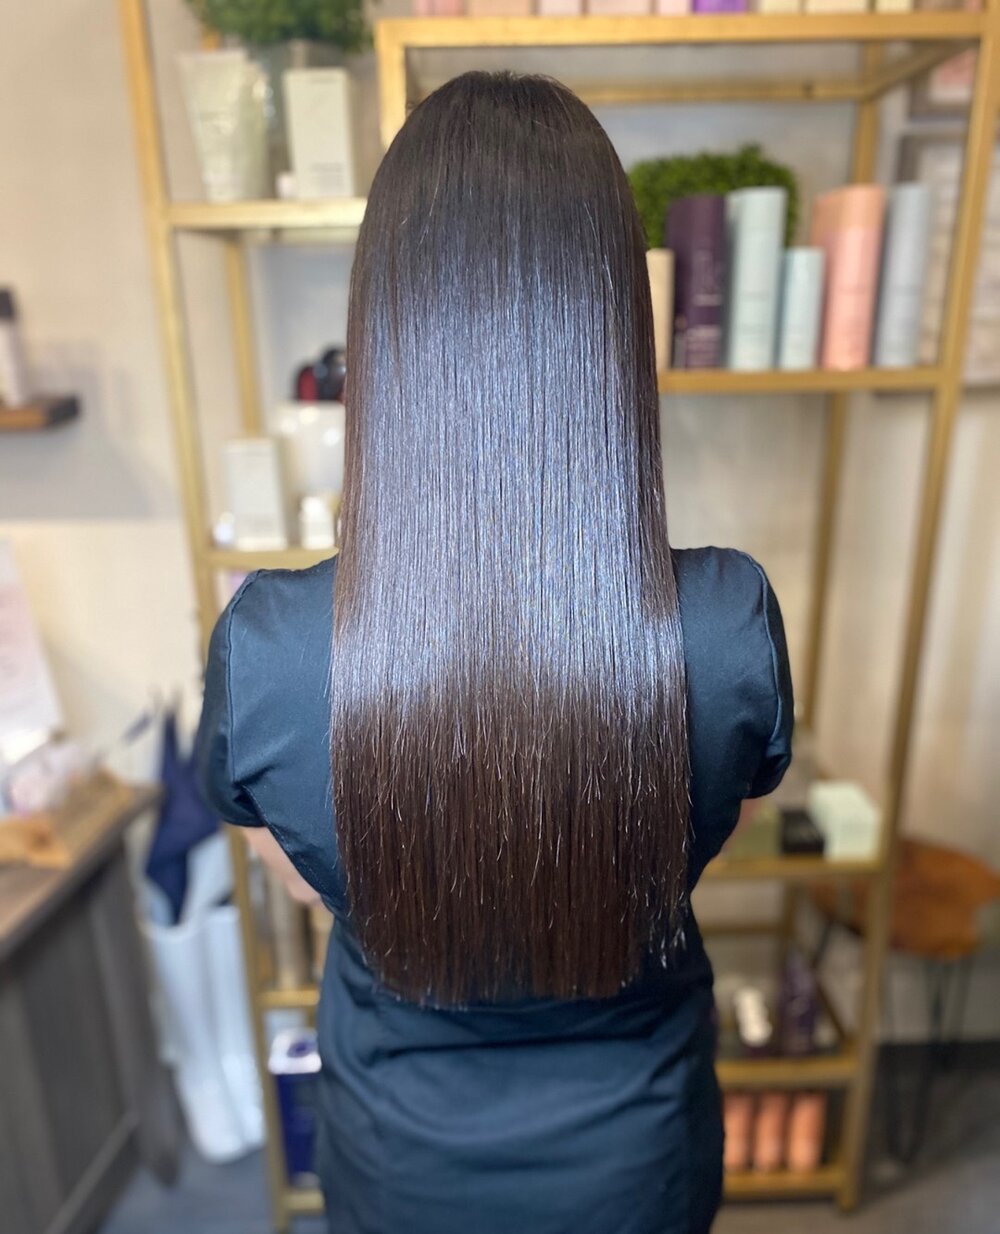 Who doesn't love a fresh keratin treatment? That shine is unbelievable!